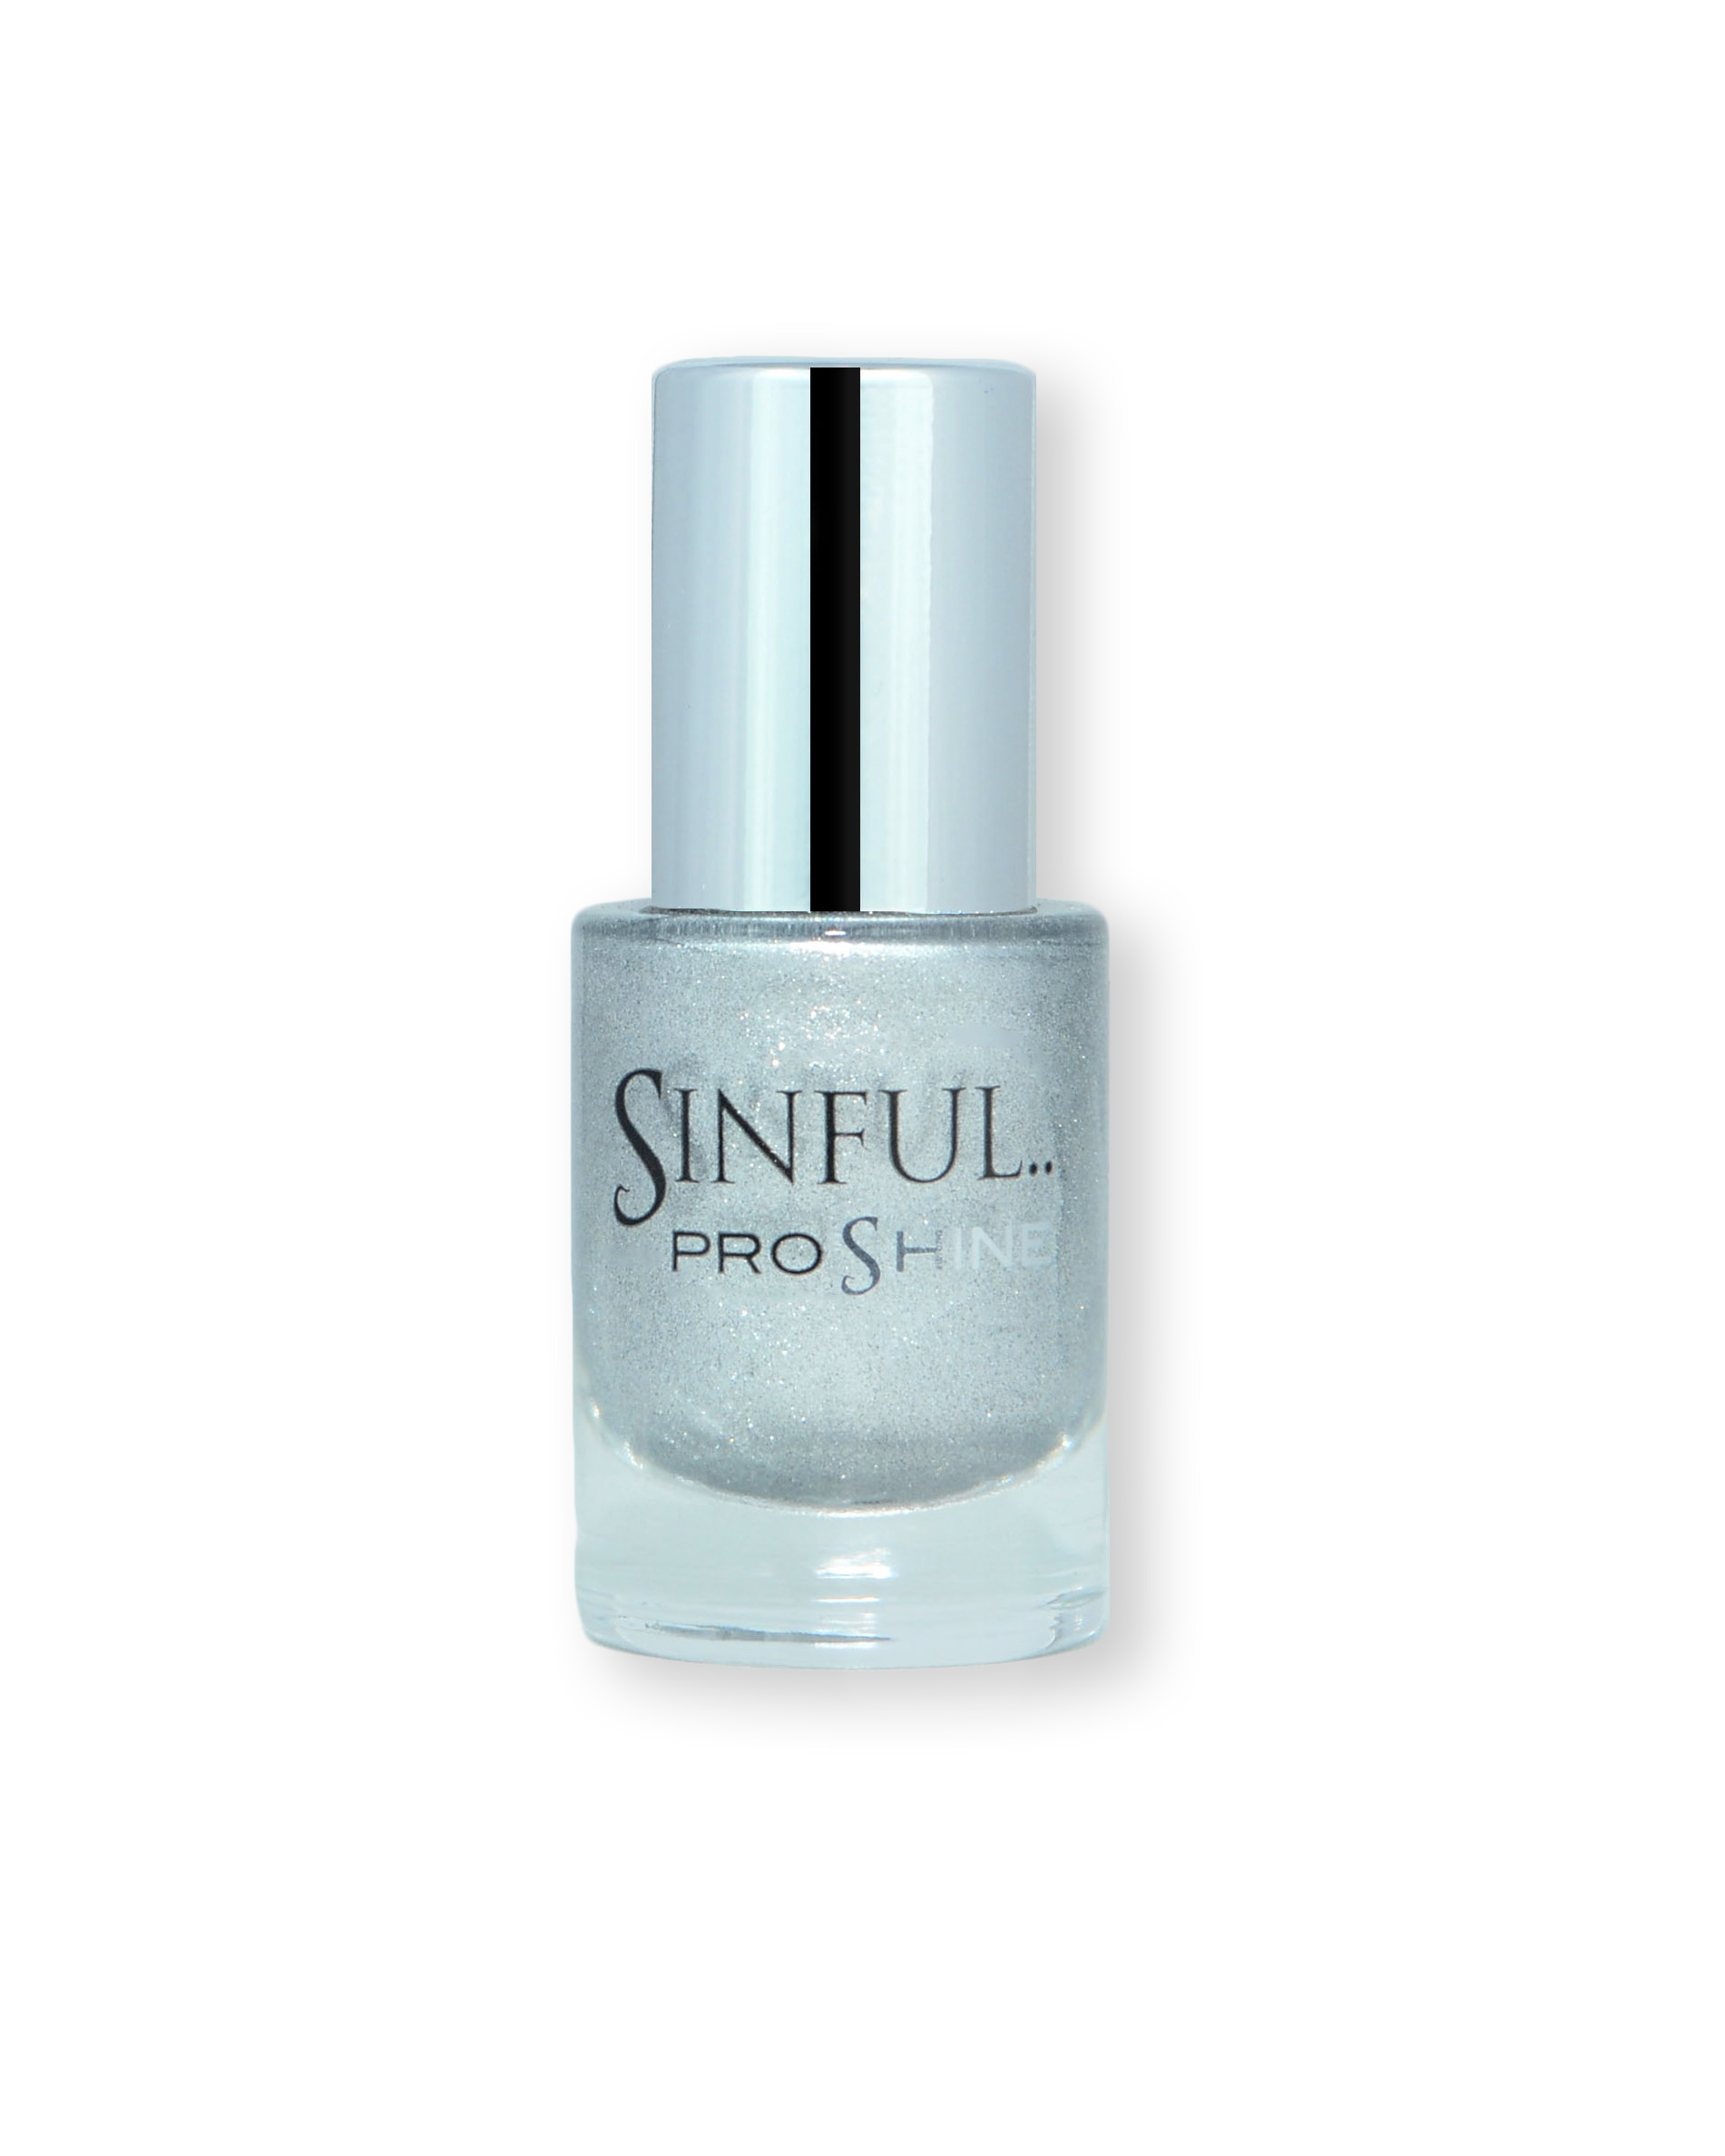 Sinful PROshine is a revolution into top spec imitation gel-like formula, easy application, full coverage and a sleek finish. Spoil yourself with the choice of 42 shades, expertly formulated with the finest grade of pigments. Spoilt Rotten: Luxurious silver foil finish